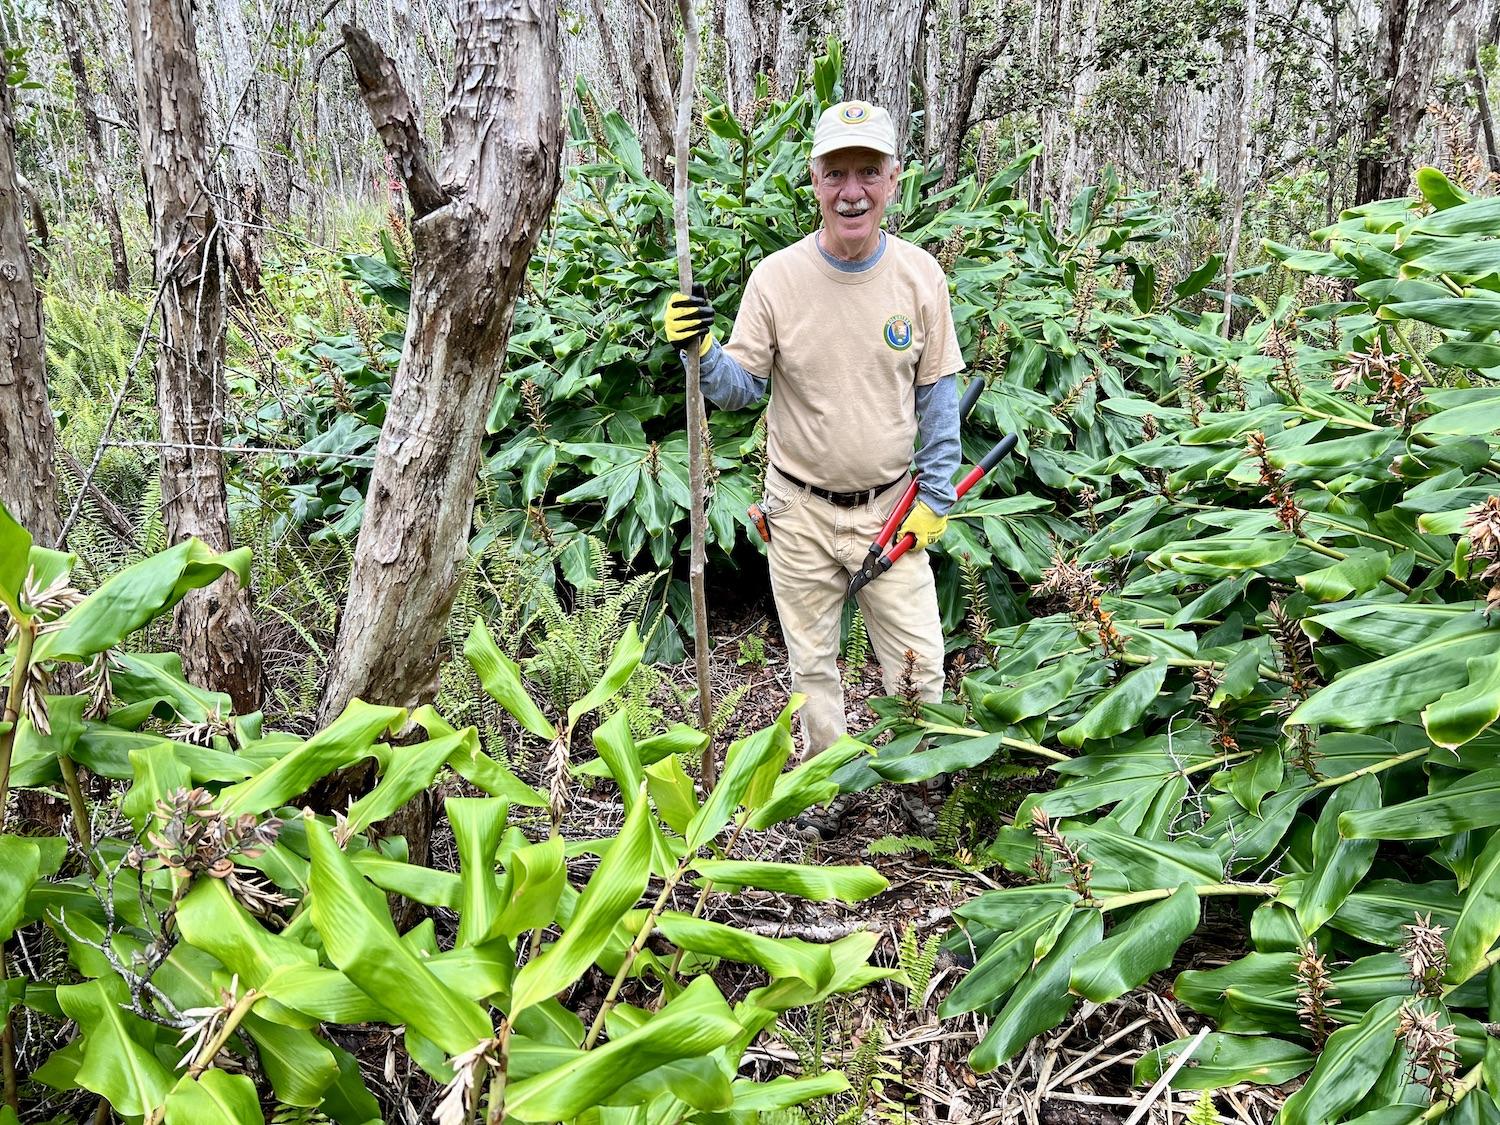 At Hawai'i Volcanoes National Park, Paul Field (shown) and his wife Jane are project leaders of a volunteer program called Stewardship at the Summit that tackles invasive species.